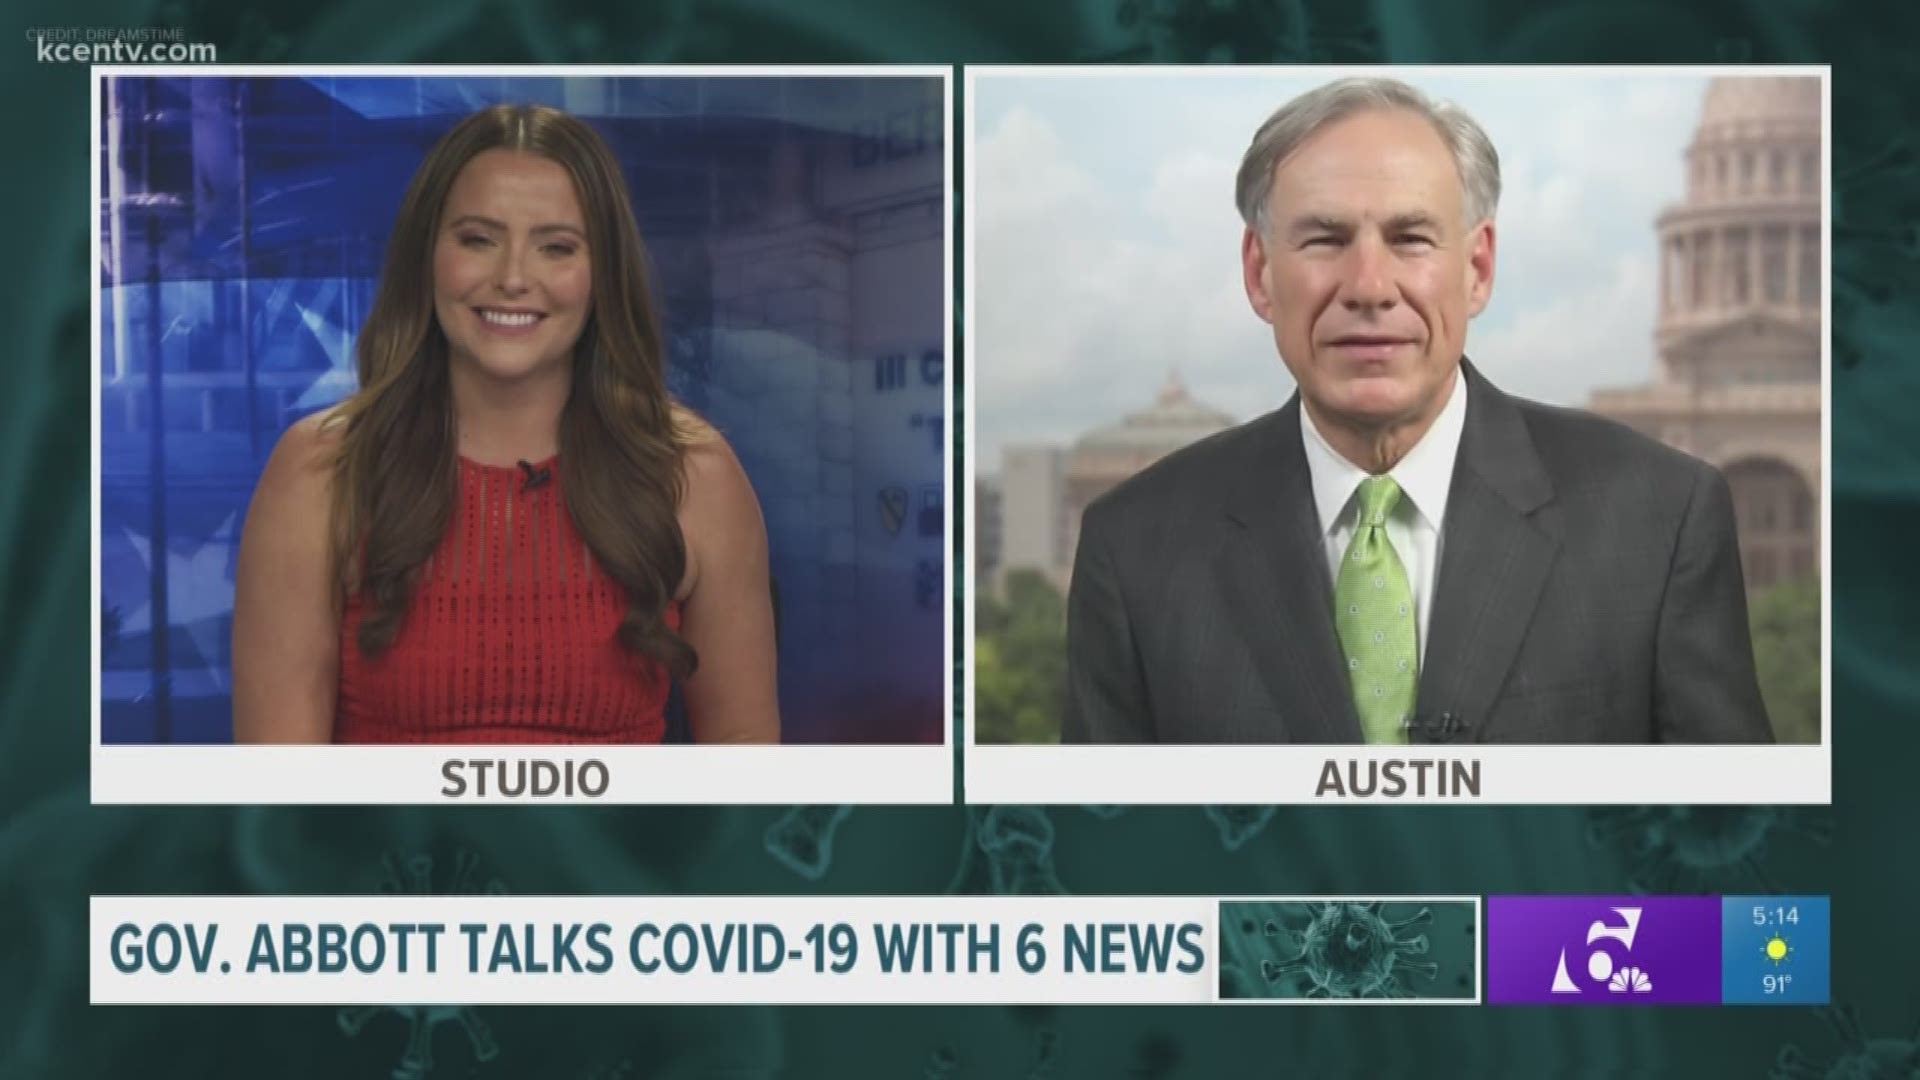 6 News spoke with Gov. Abbott and asked questions on everyone's minds regarding work and school openings, stimulus checks and more on the state's COVID-19 response.